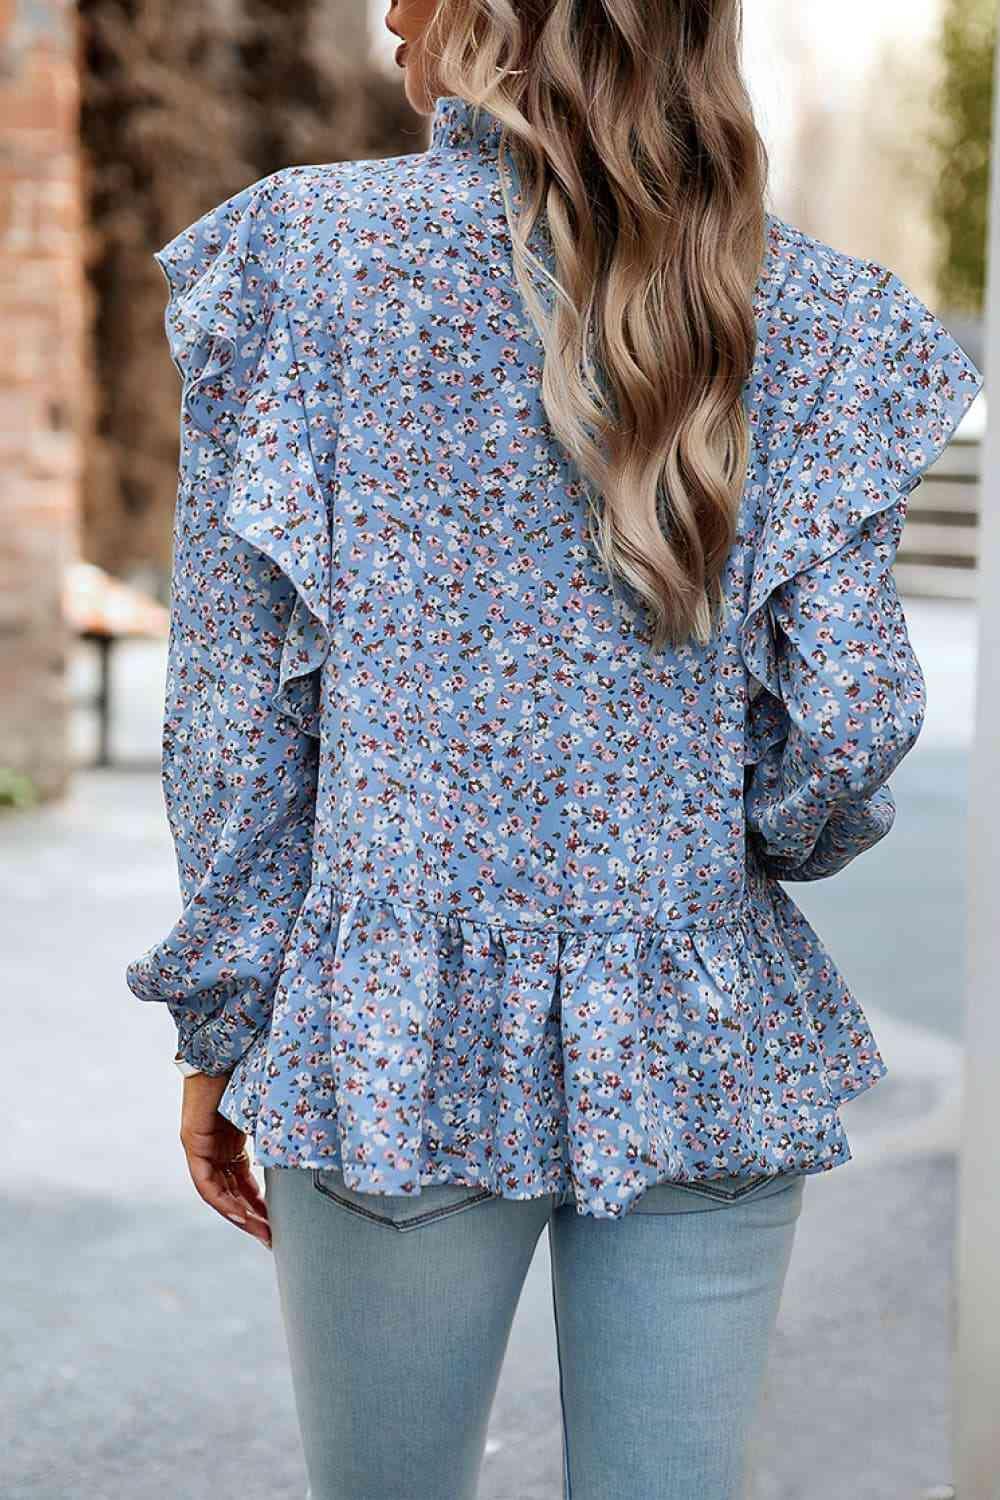 a woman wearing a blue floral blouse and jeans